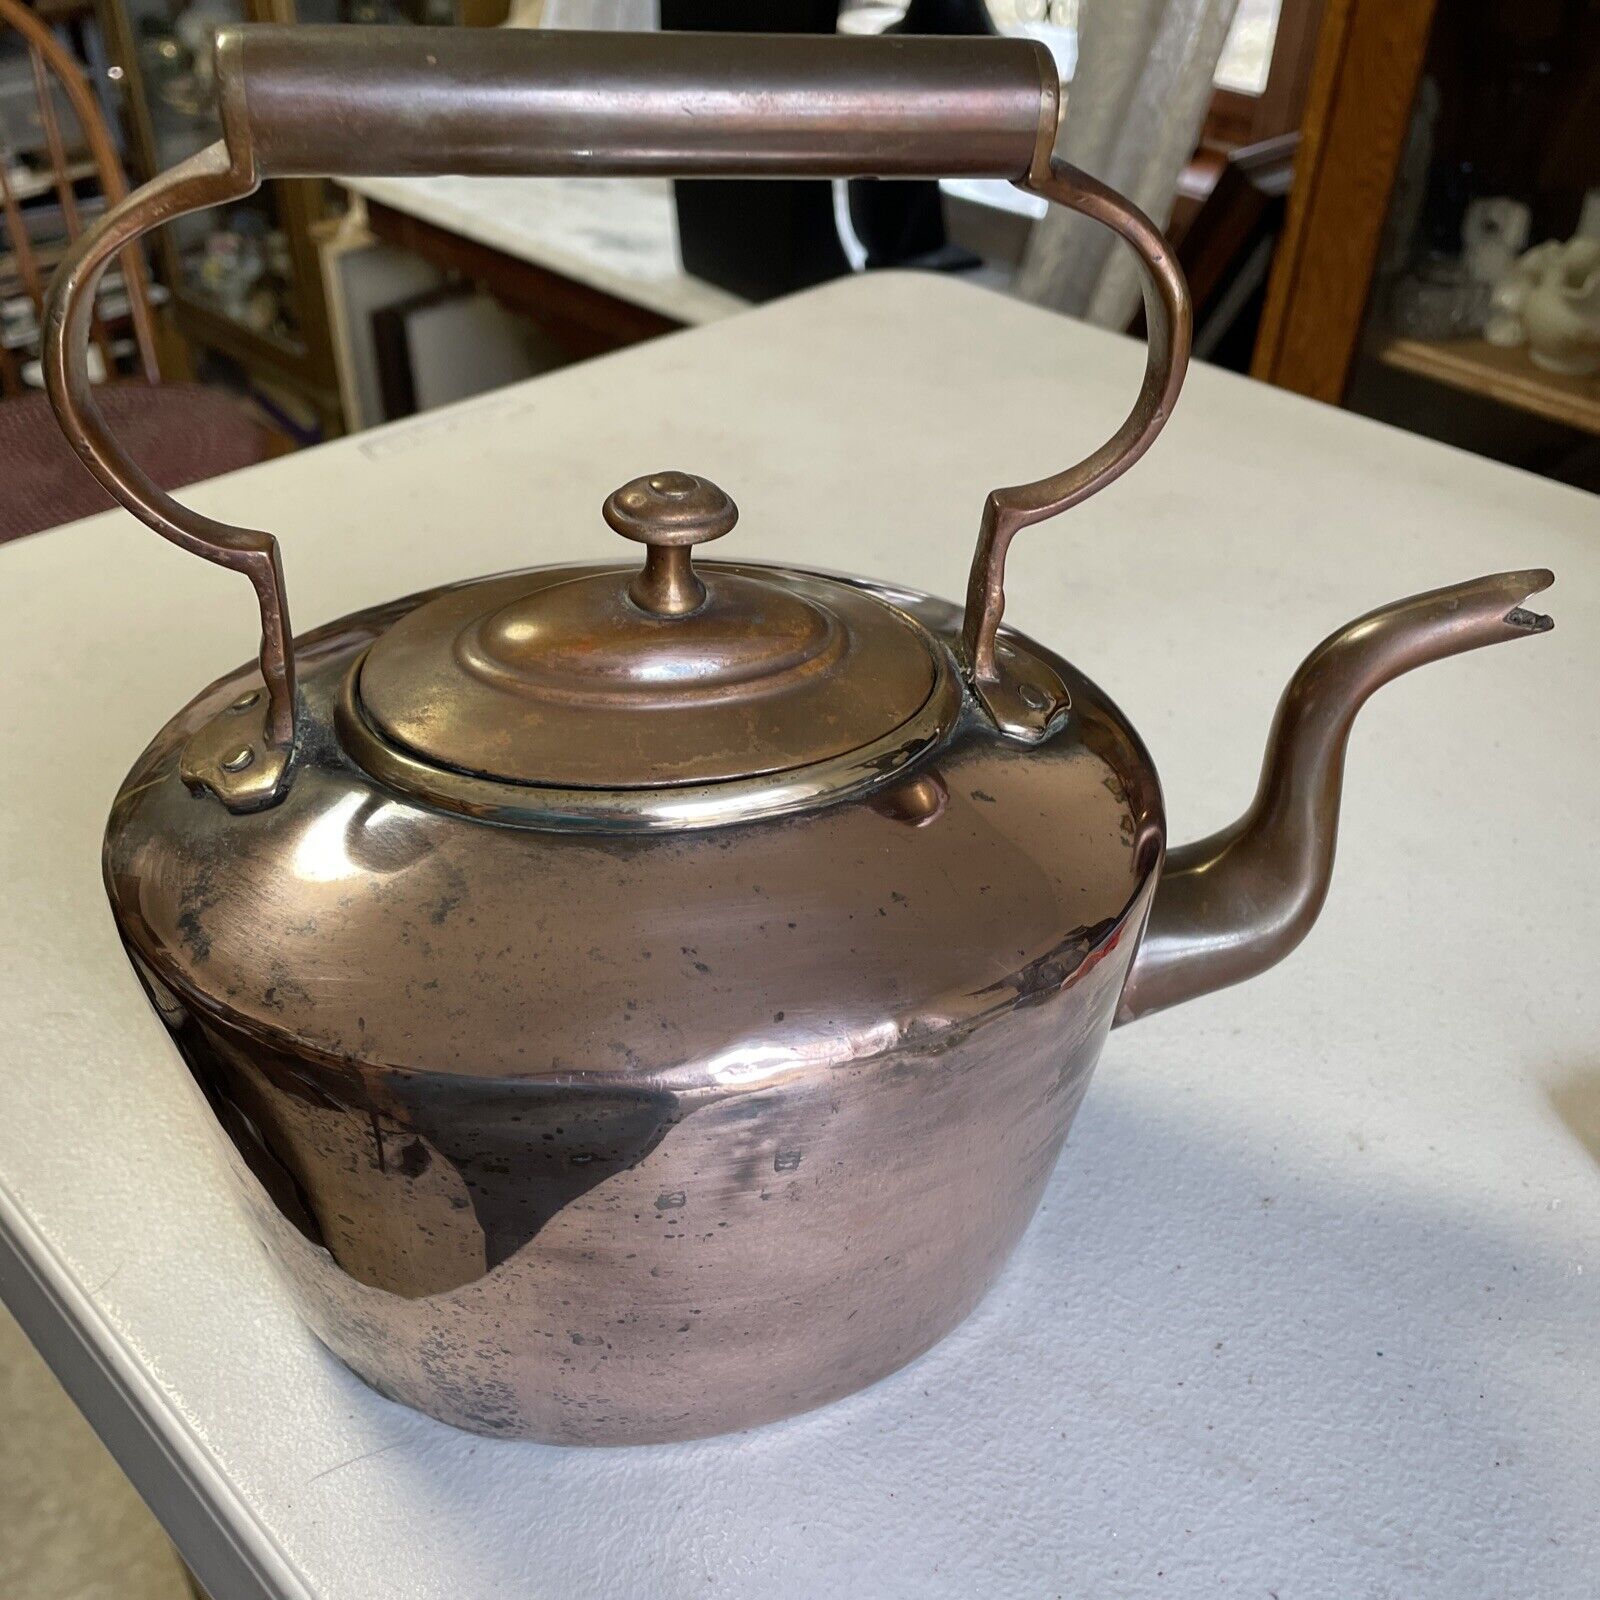 Antique 19th century American Federal Copper & Brass Tea Pot Hot Water Kettle